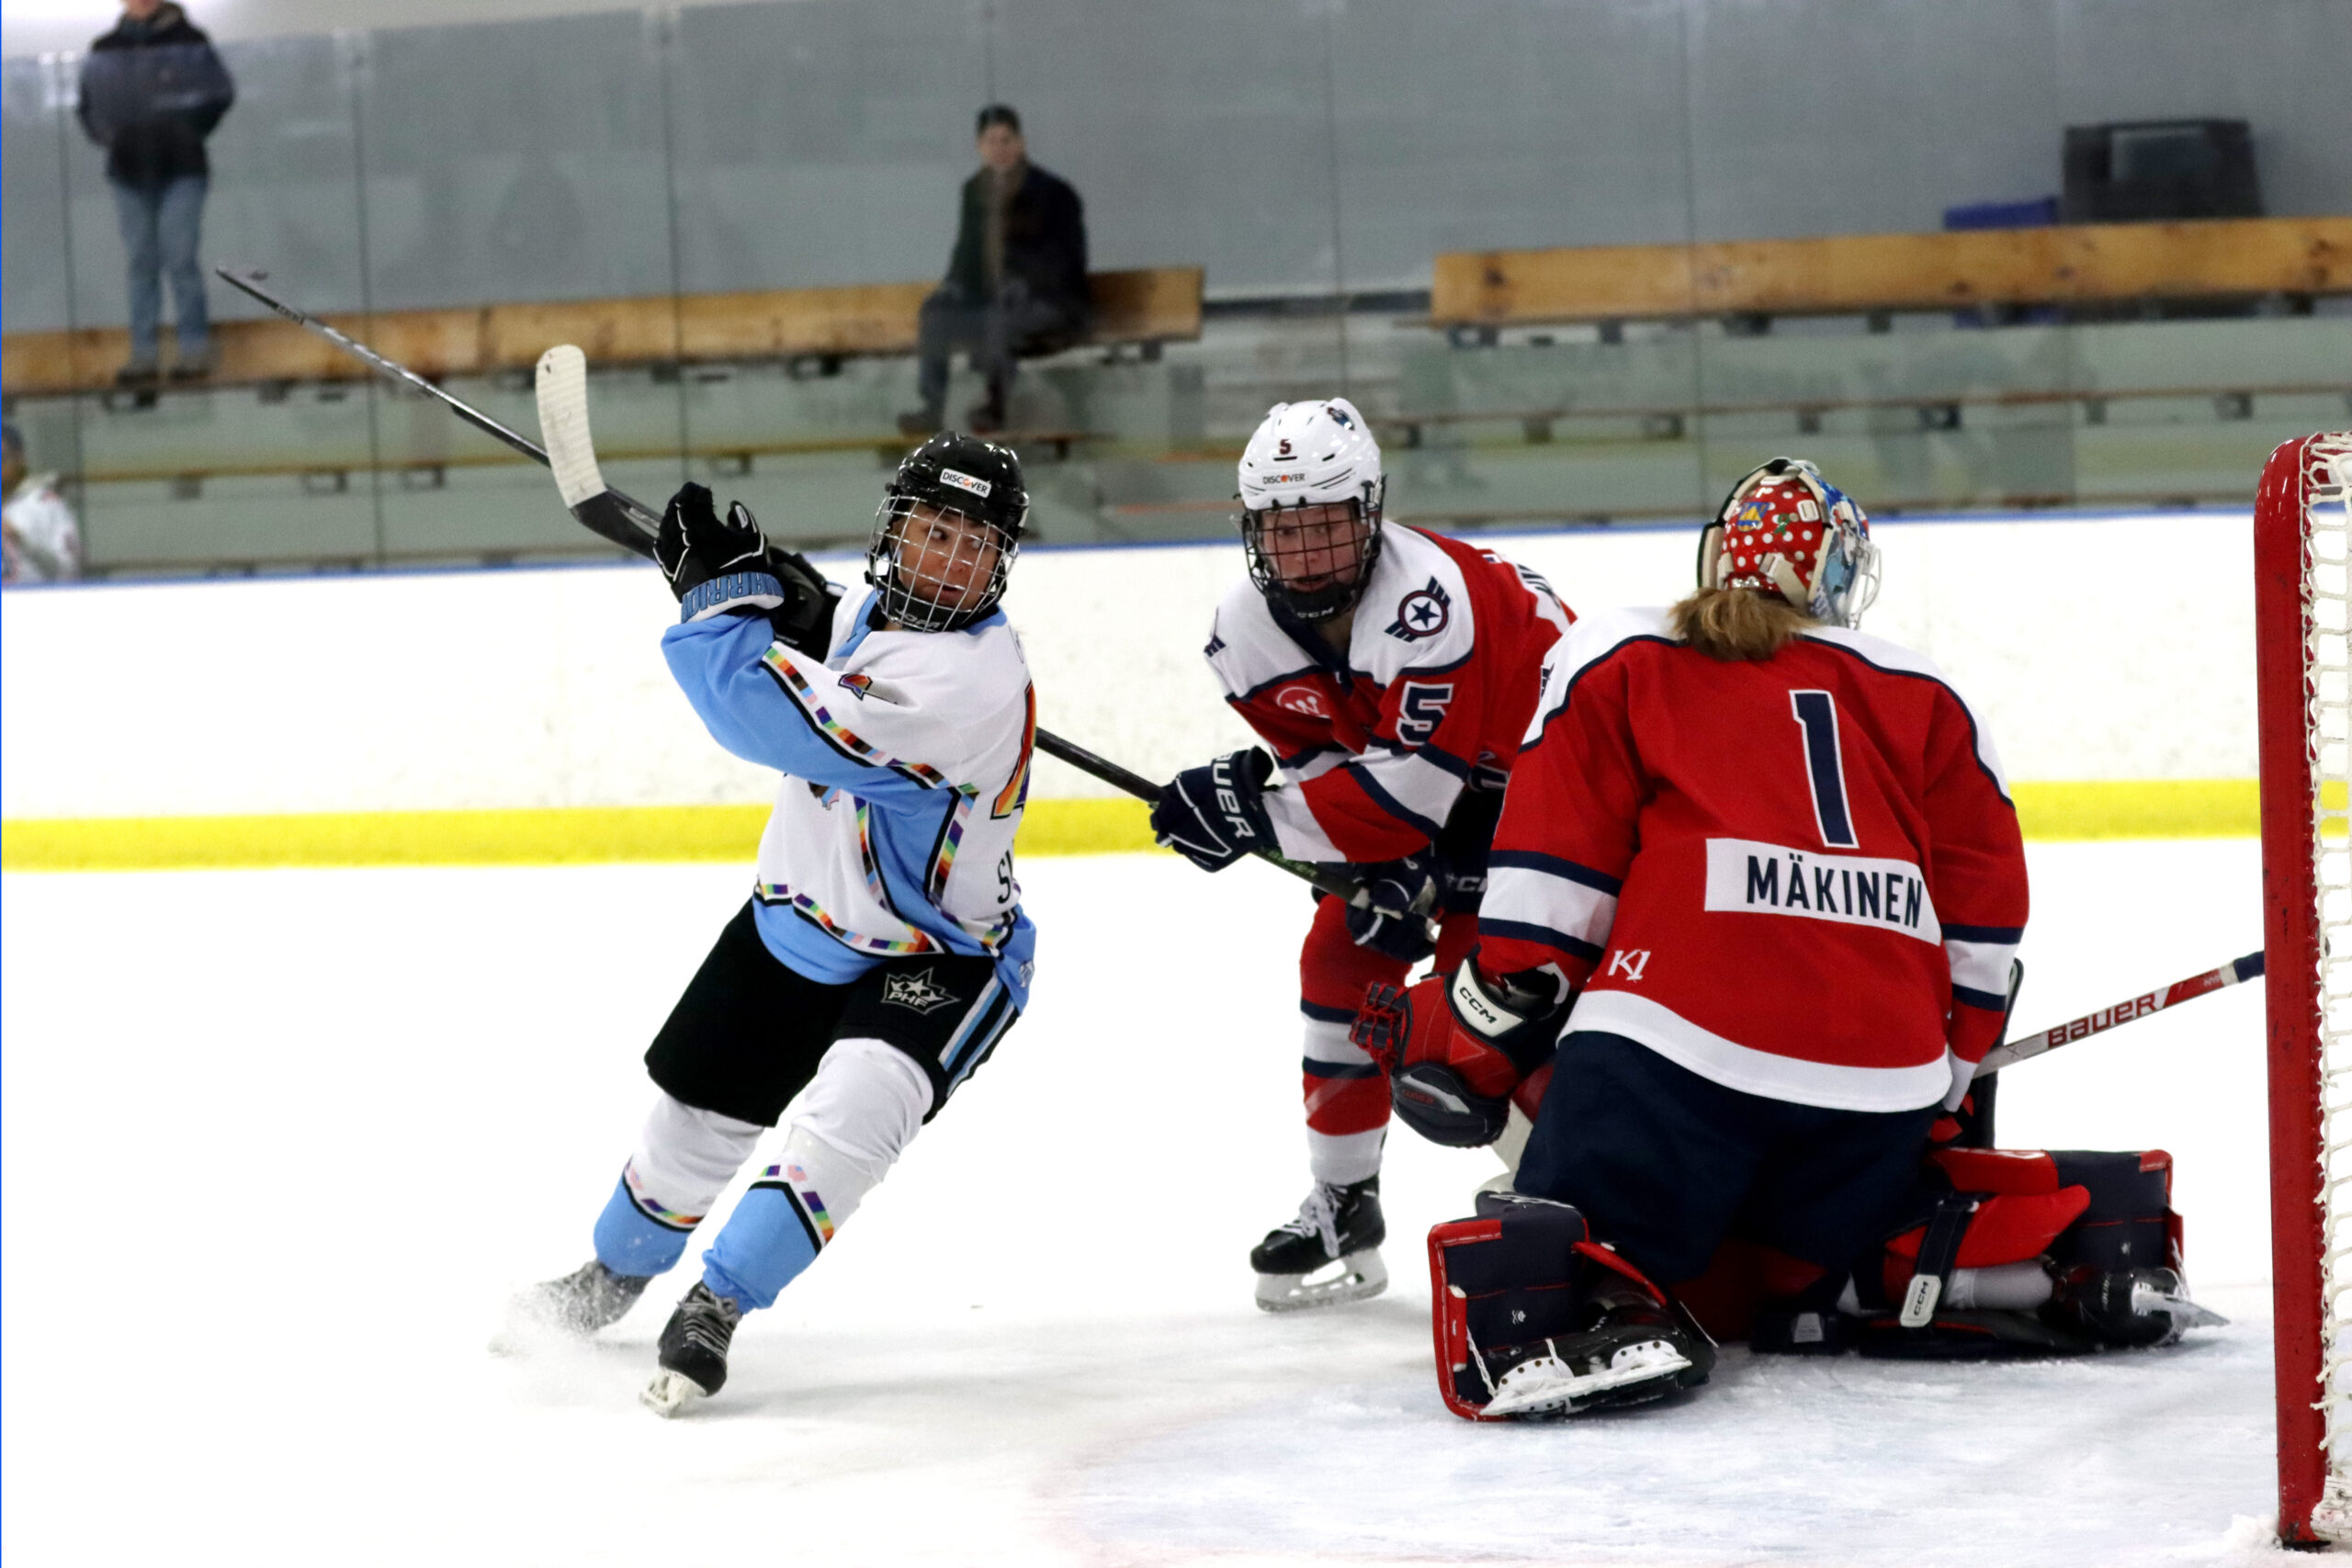 Women's hockey professional league announced for January